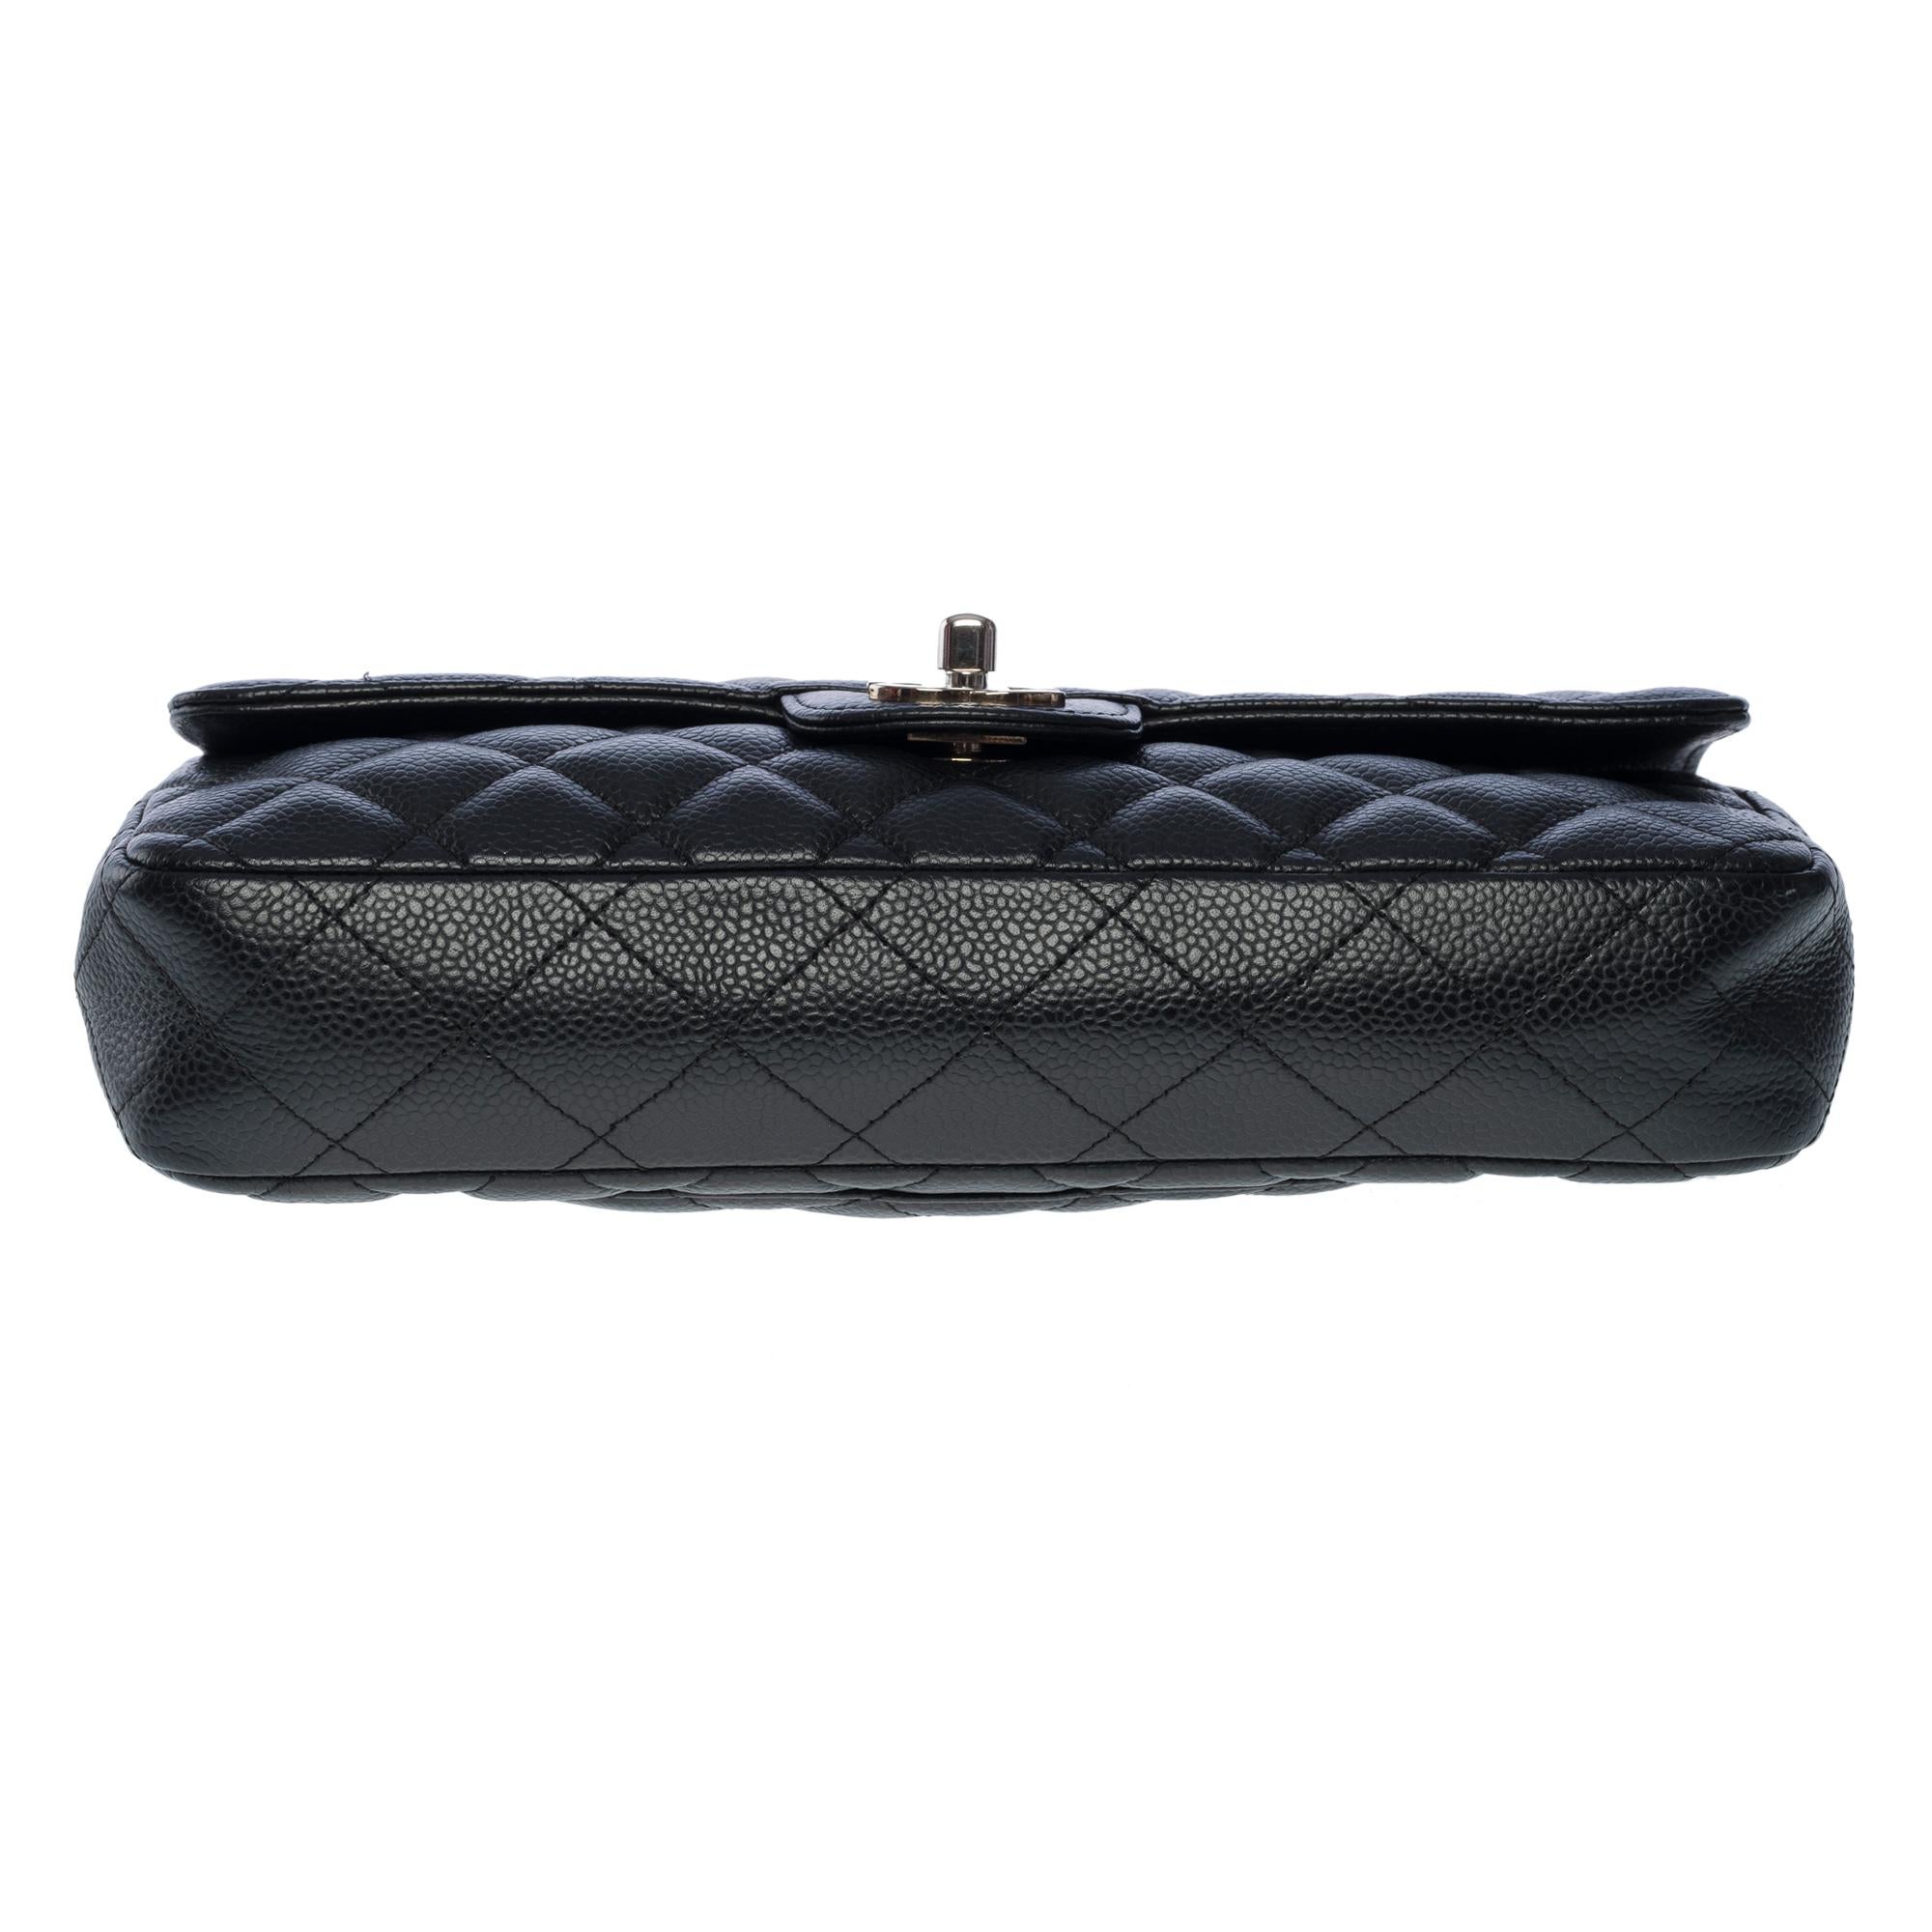 Chanel Classic Baguette shoulder bag in black caviar quilted leather , SHW 6